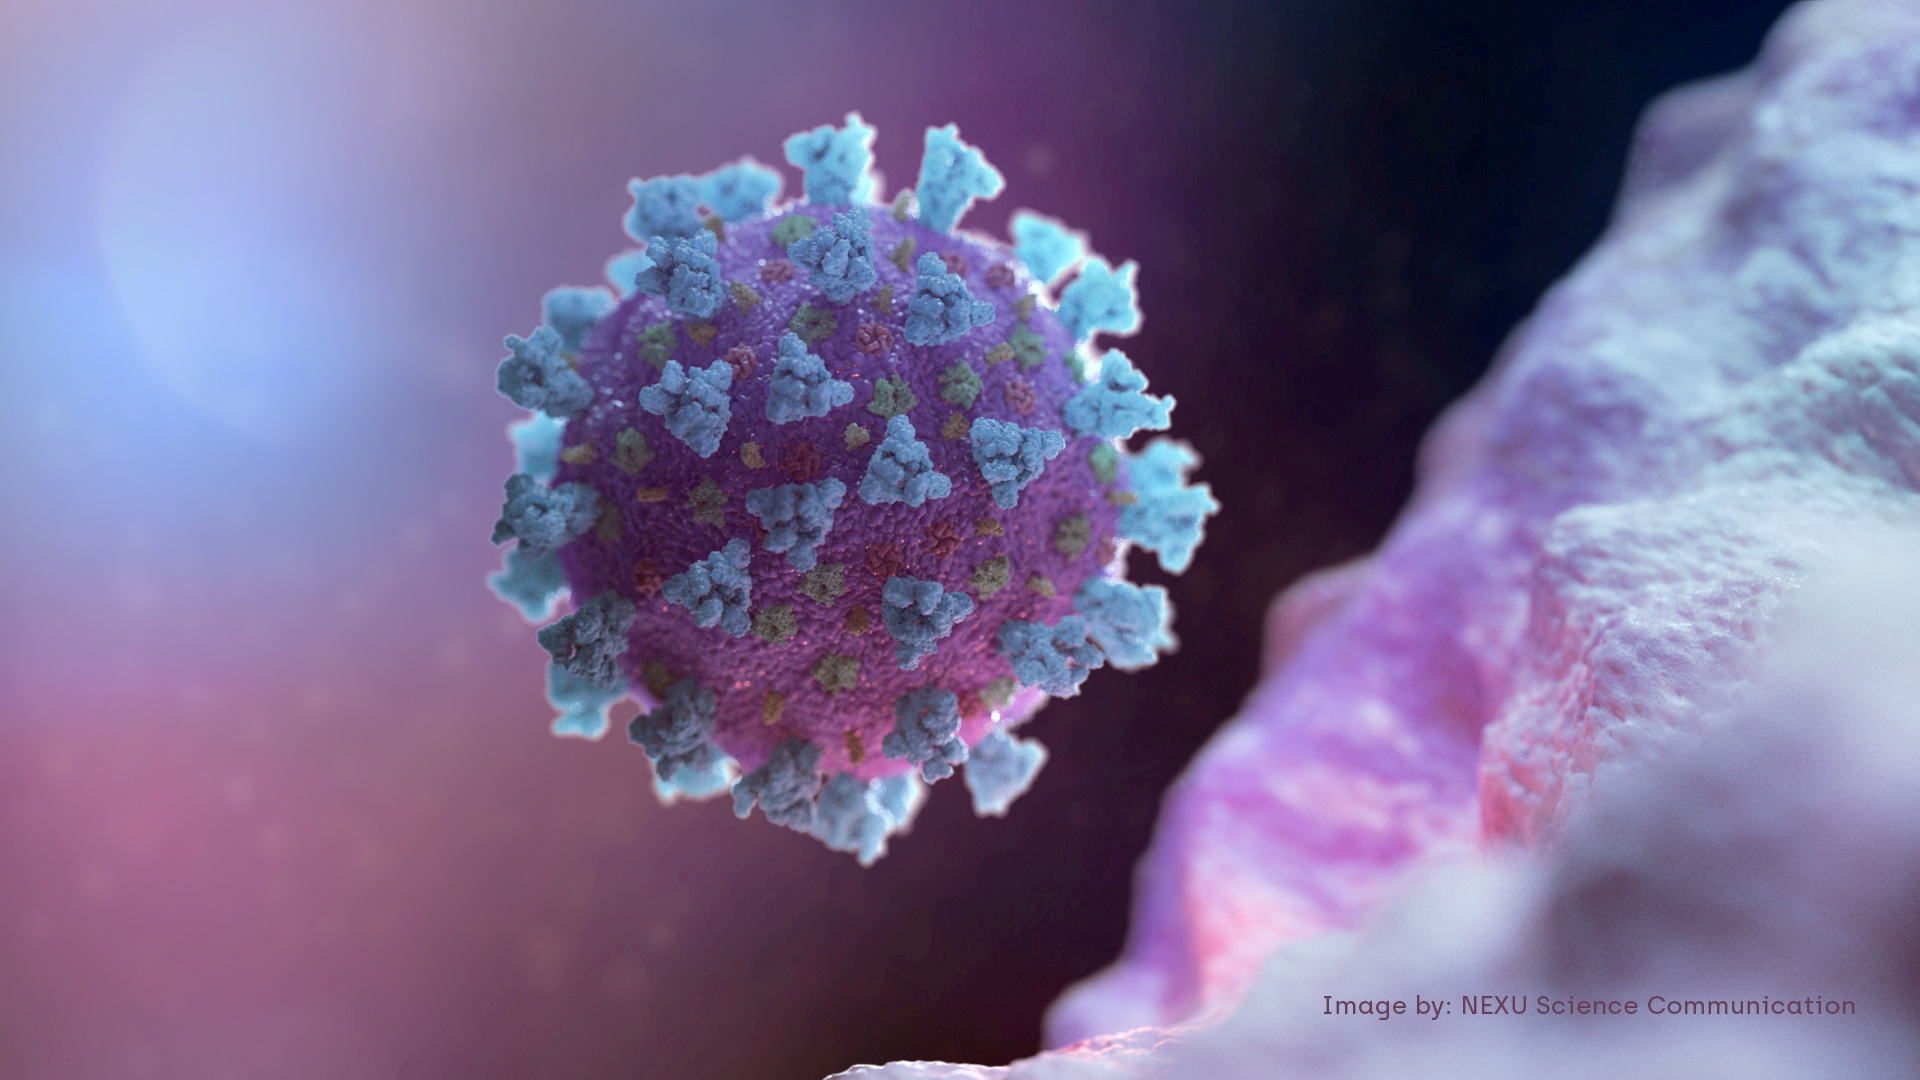 A computer image created by Nexu Science Communication together with Trinity College in Dublin, shows a model structurally representative of a betacoronavirus which is the type of virus linked to COVID-19, shared with Reuters on February 18, 2020. NEXU Science Communication/via REUTERS 